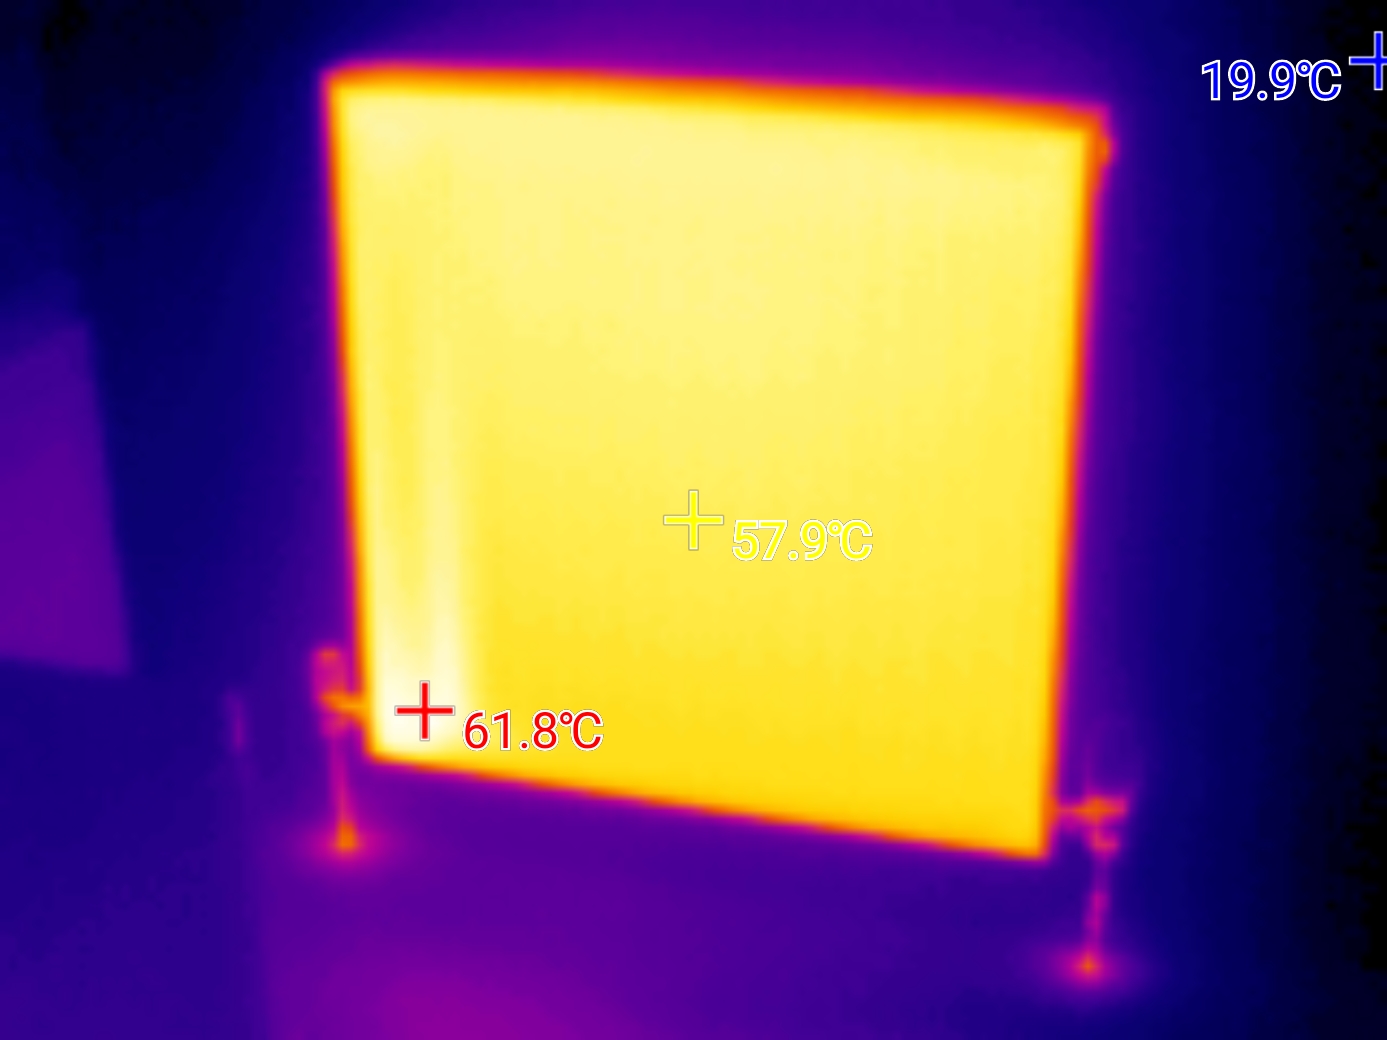 Thermal image of a radiator from a NF-583